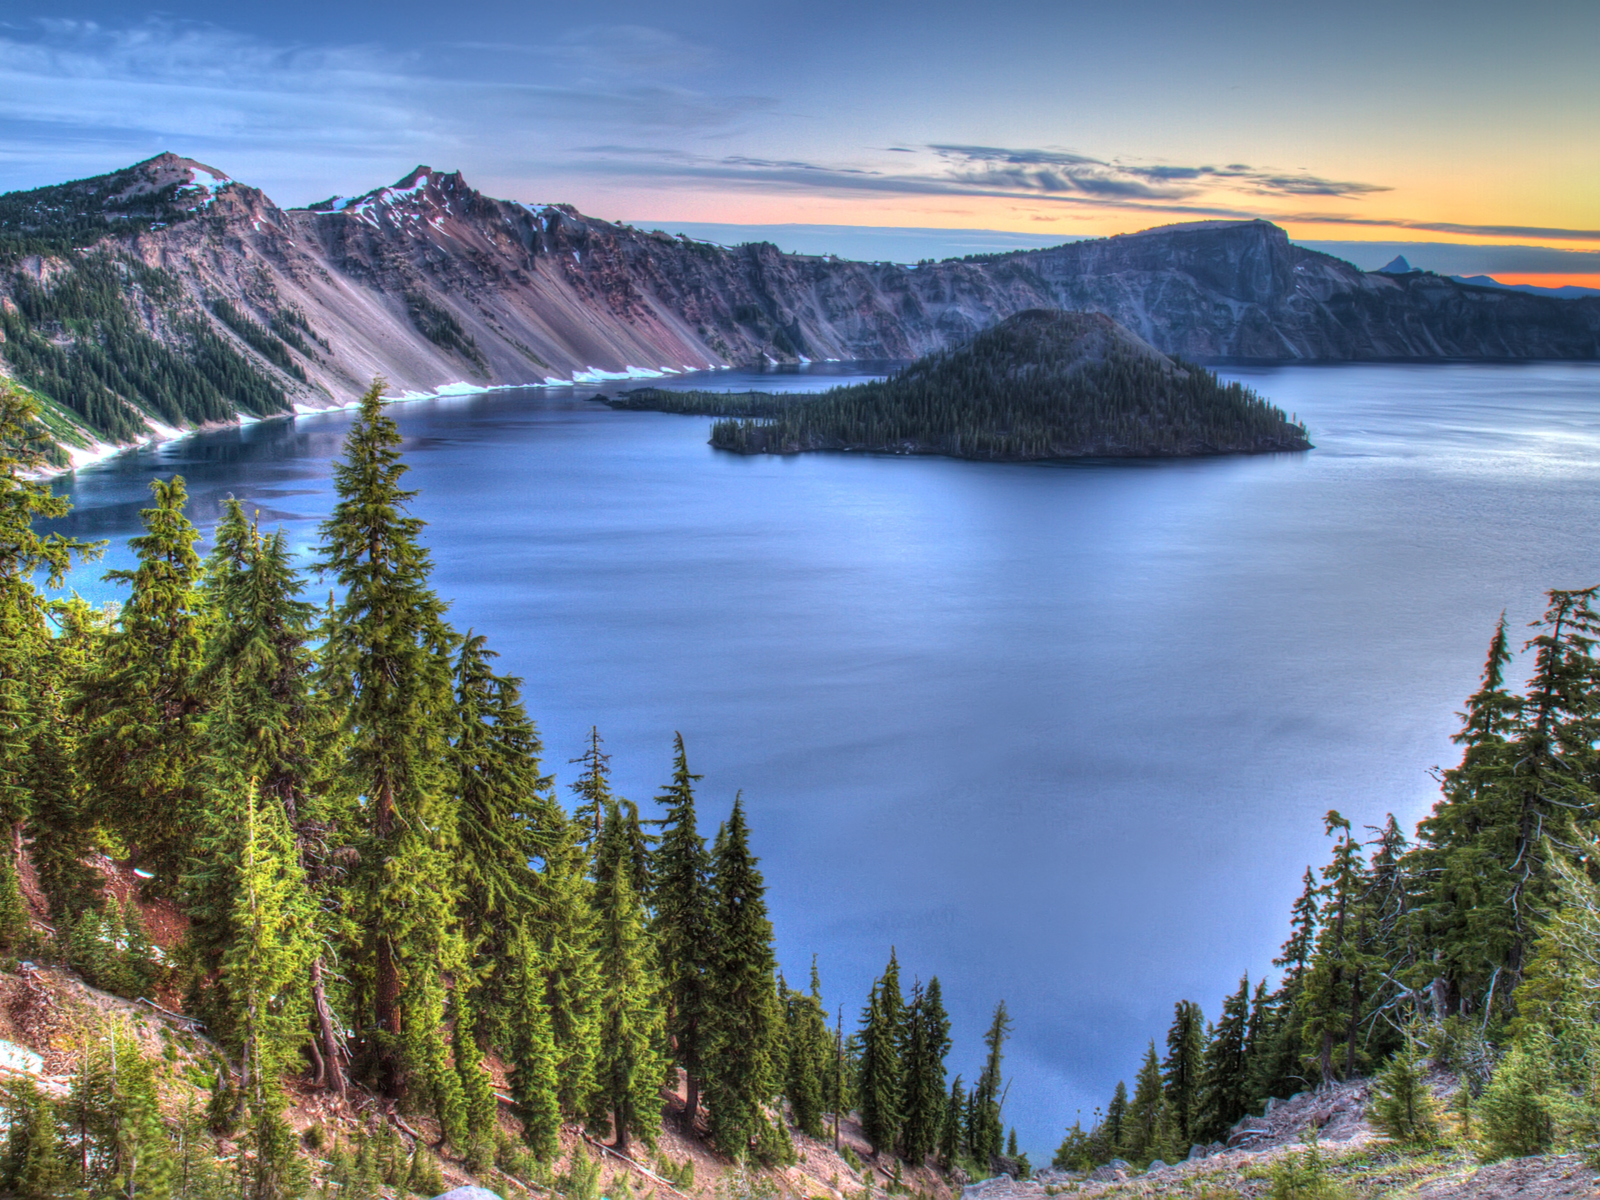 Sunrise over Crater Lake, one of the best places to visit in Oregon, with a gorgeous treeline and lake view